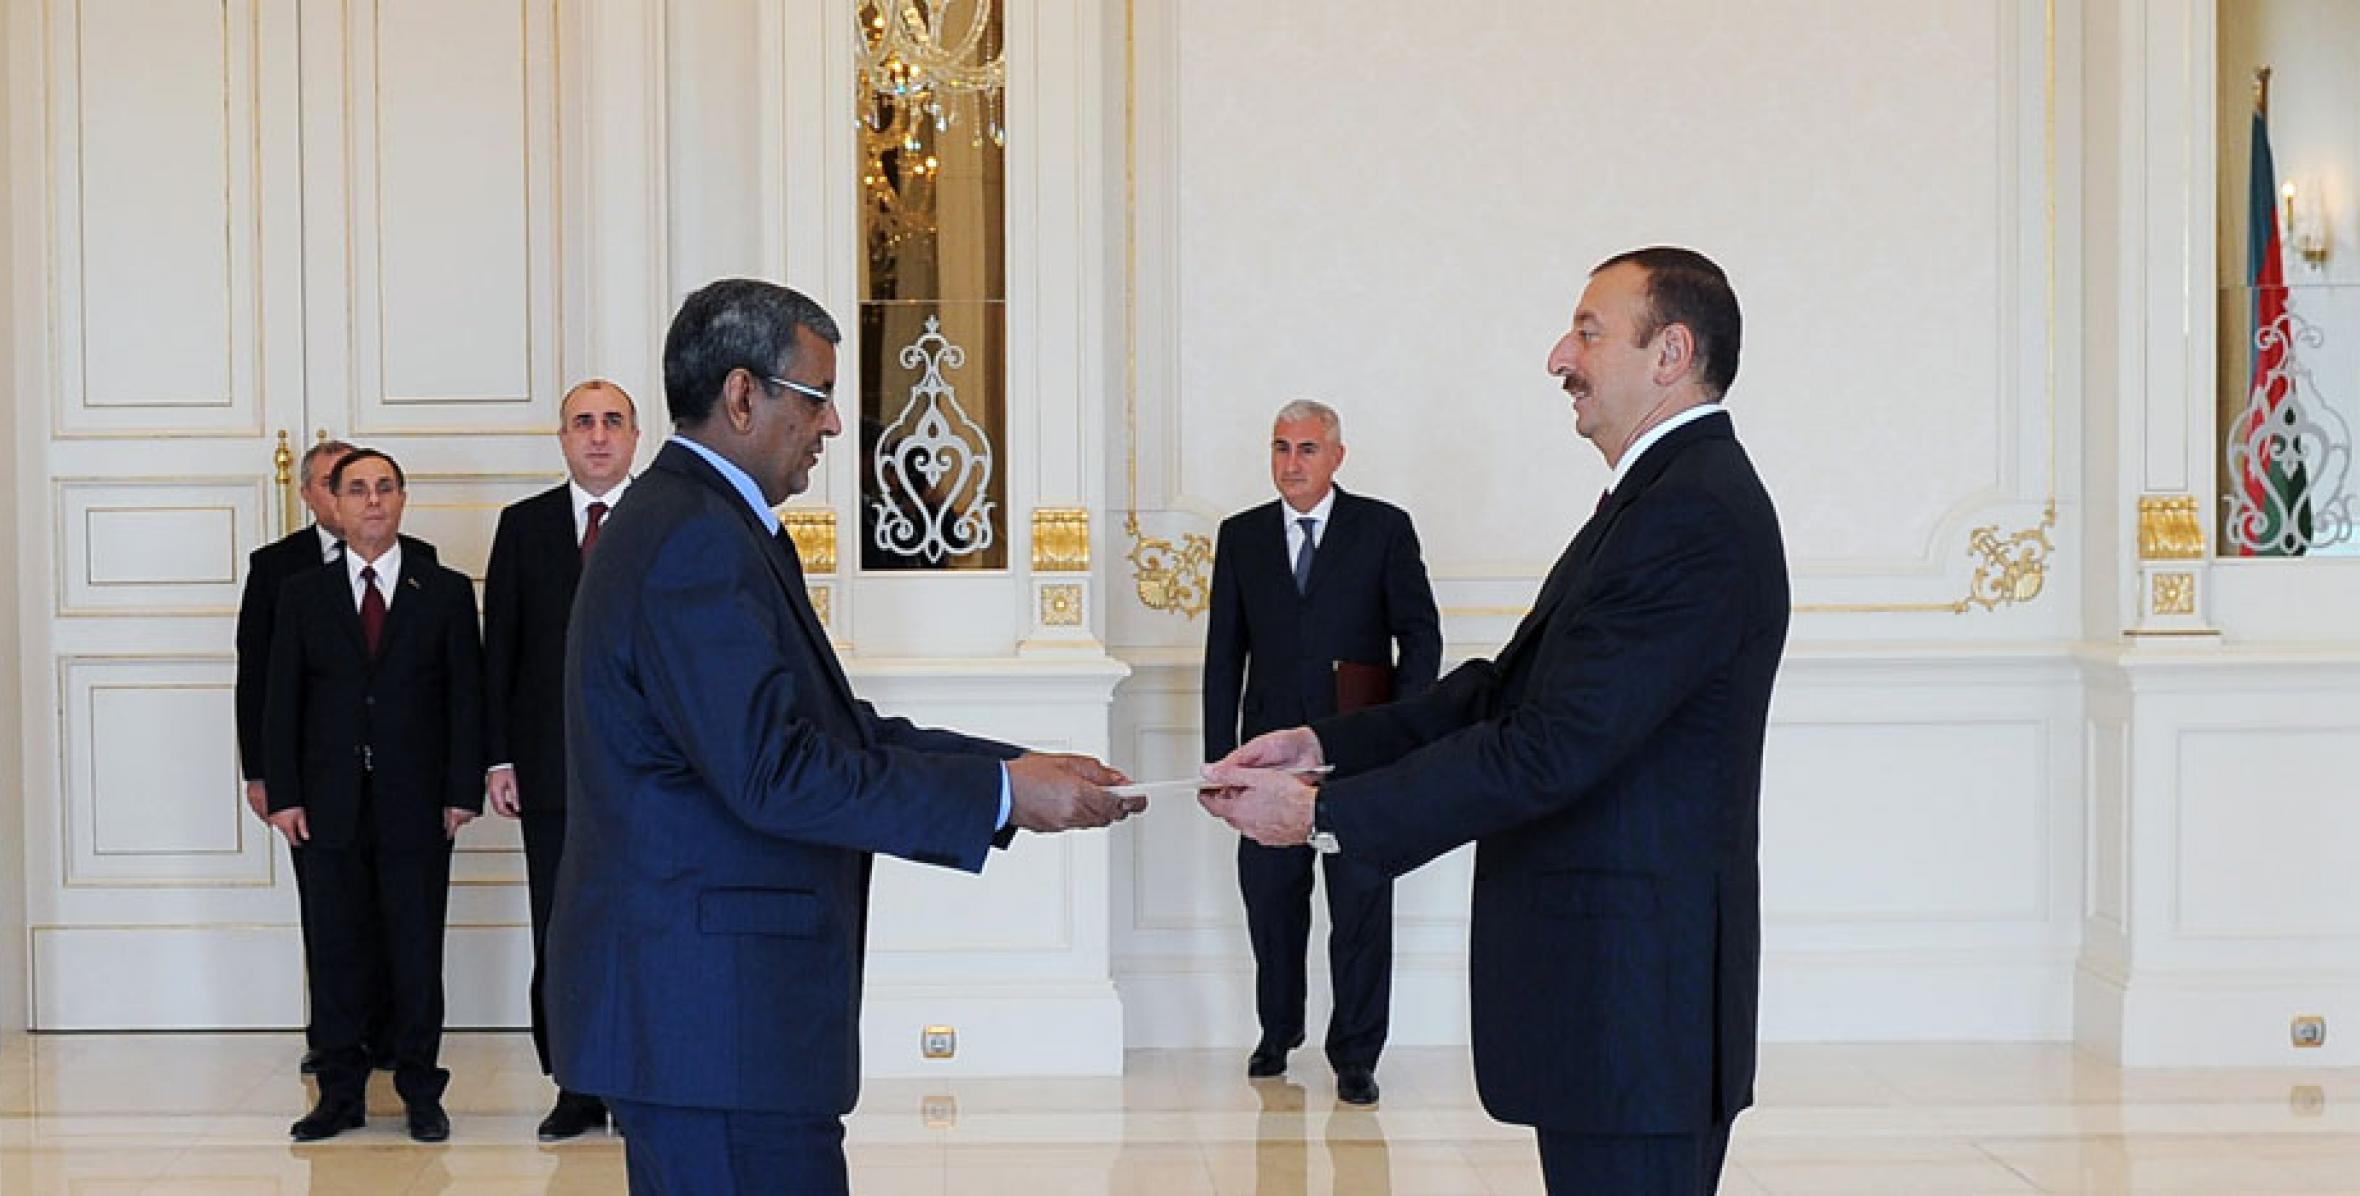 Ilham Aliyev received the credentials of the newly-appointed ambassador of Mauritania